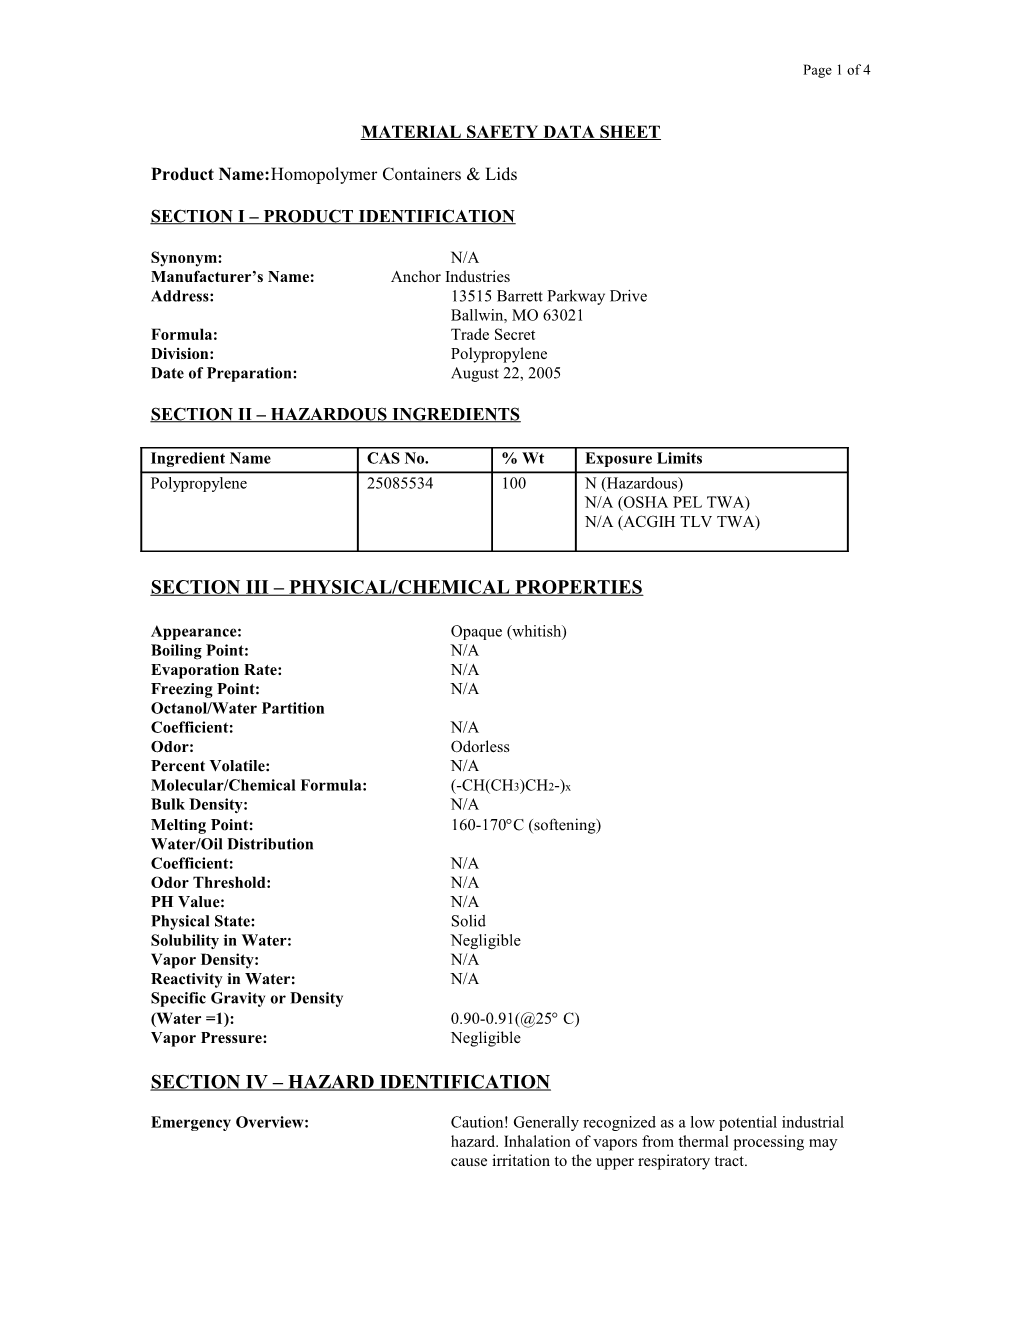 Material Safety Data Sheet s20